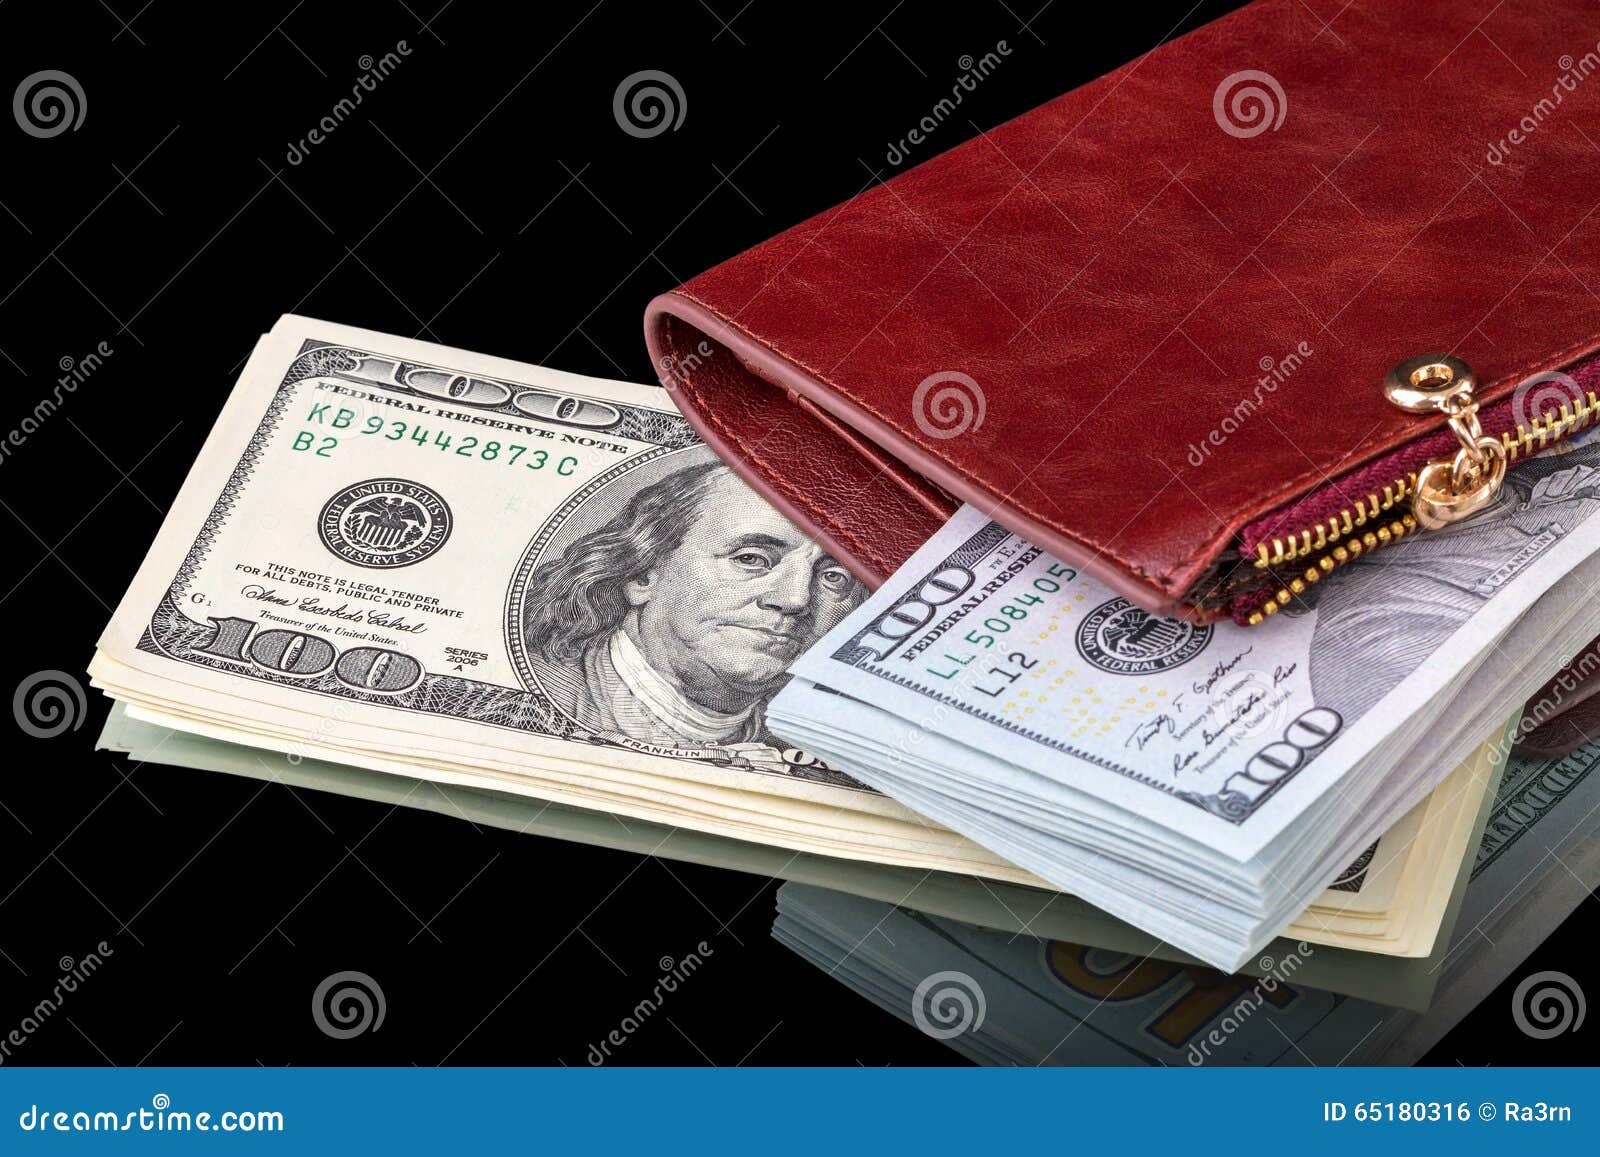 Hundred Dollar Bills on a Leather Purse Stock Photo - Image of number ...